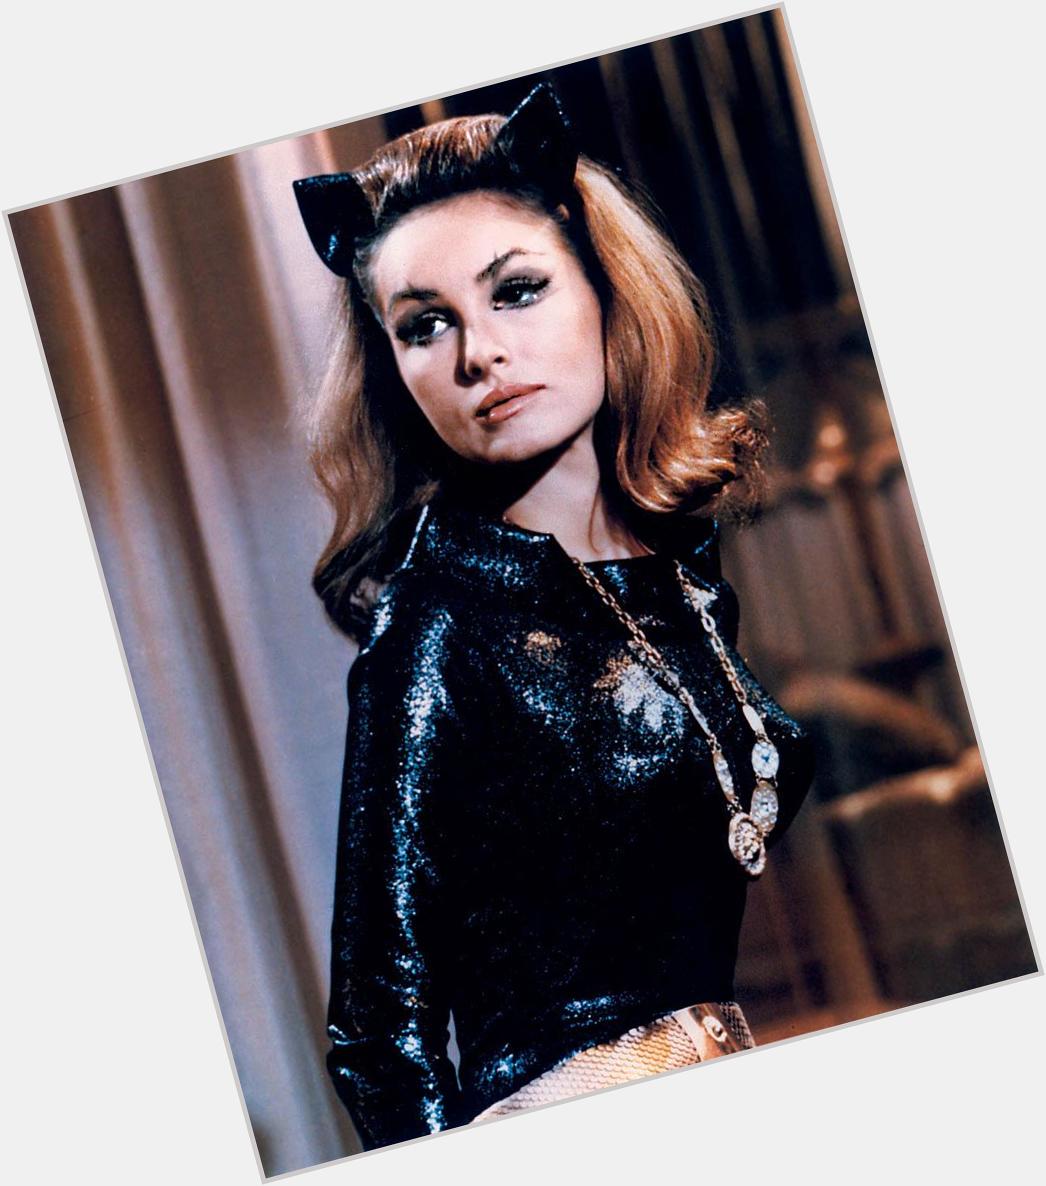 Proof of creation in a photo.
Just look at her!
BEAUTY LIKE THIS CAN\T EVOLVE!

Happy Birthday, Julie Newmar! 